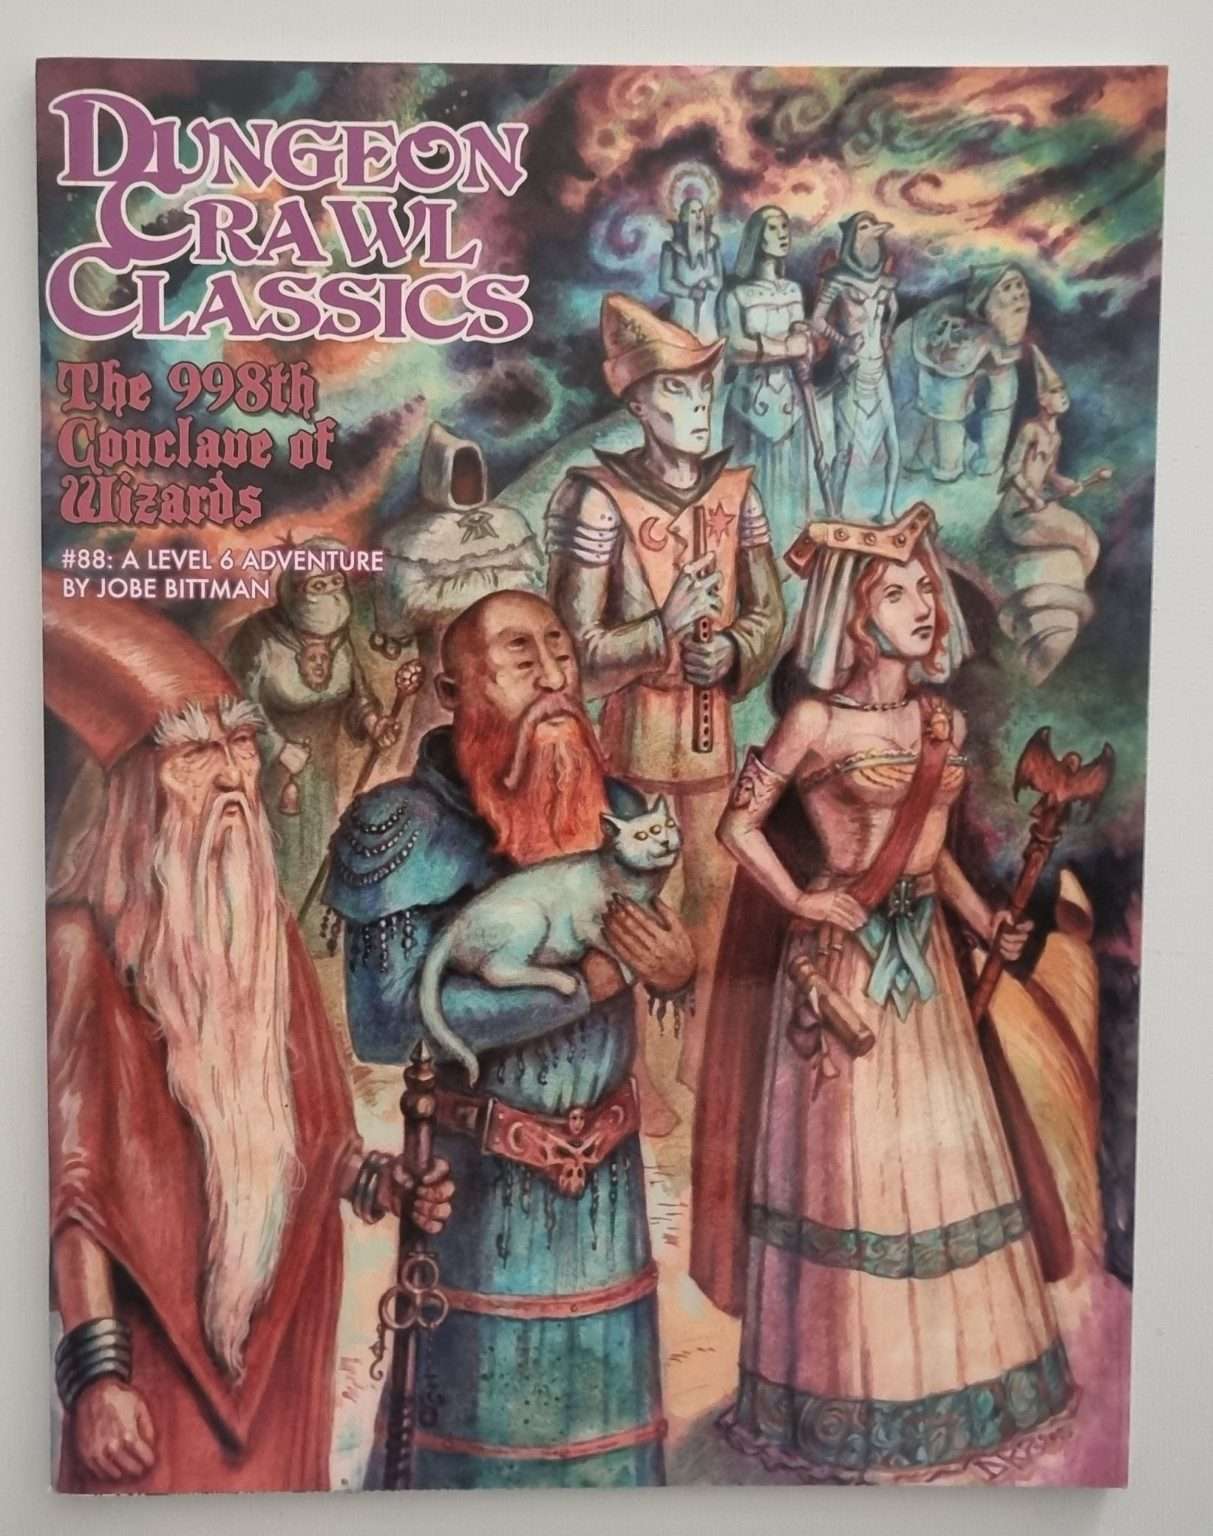 Dungeon Crawl Classics The 998th Conclave of Wizards #88 Default Title